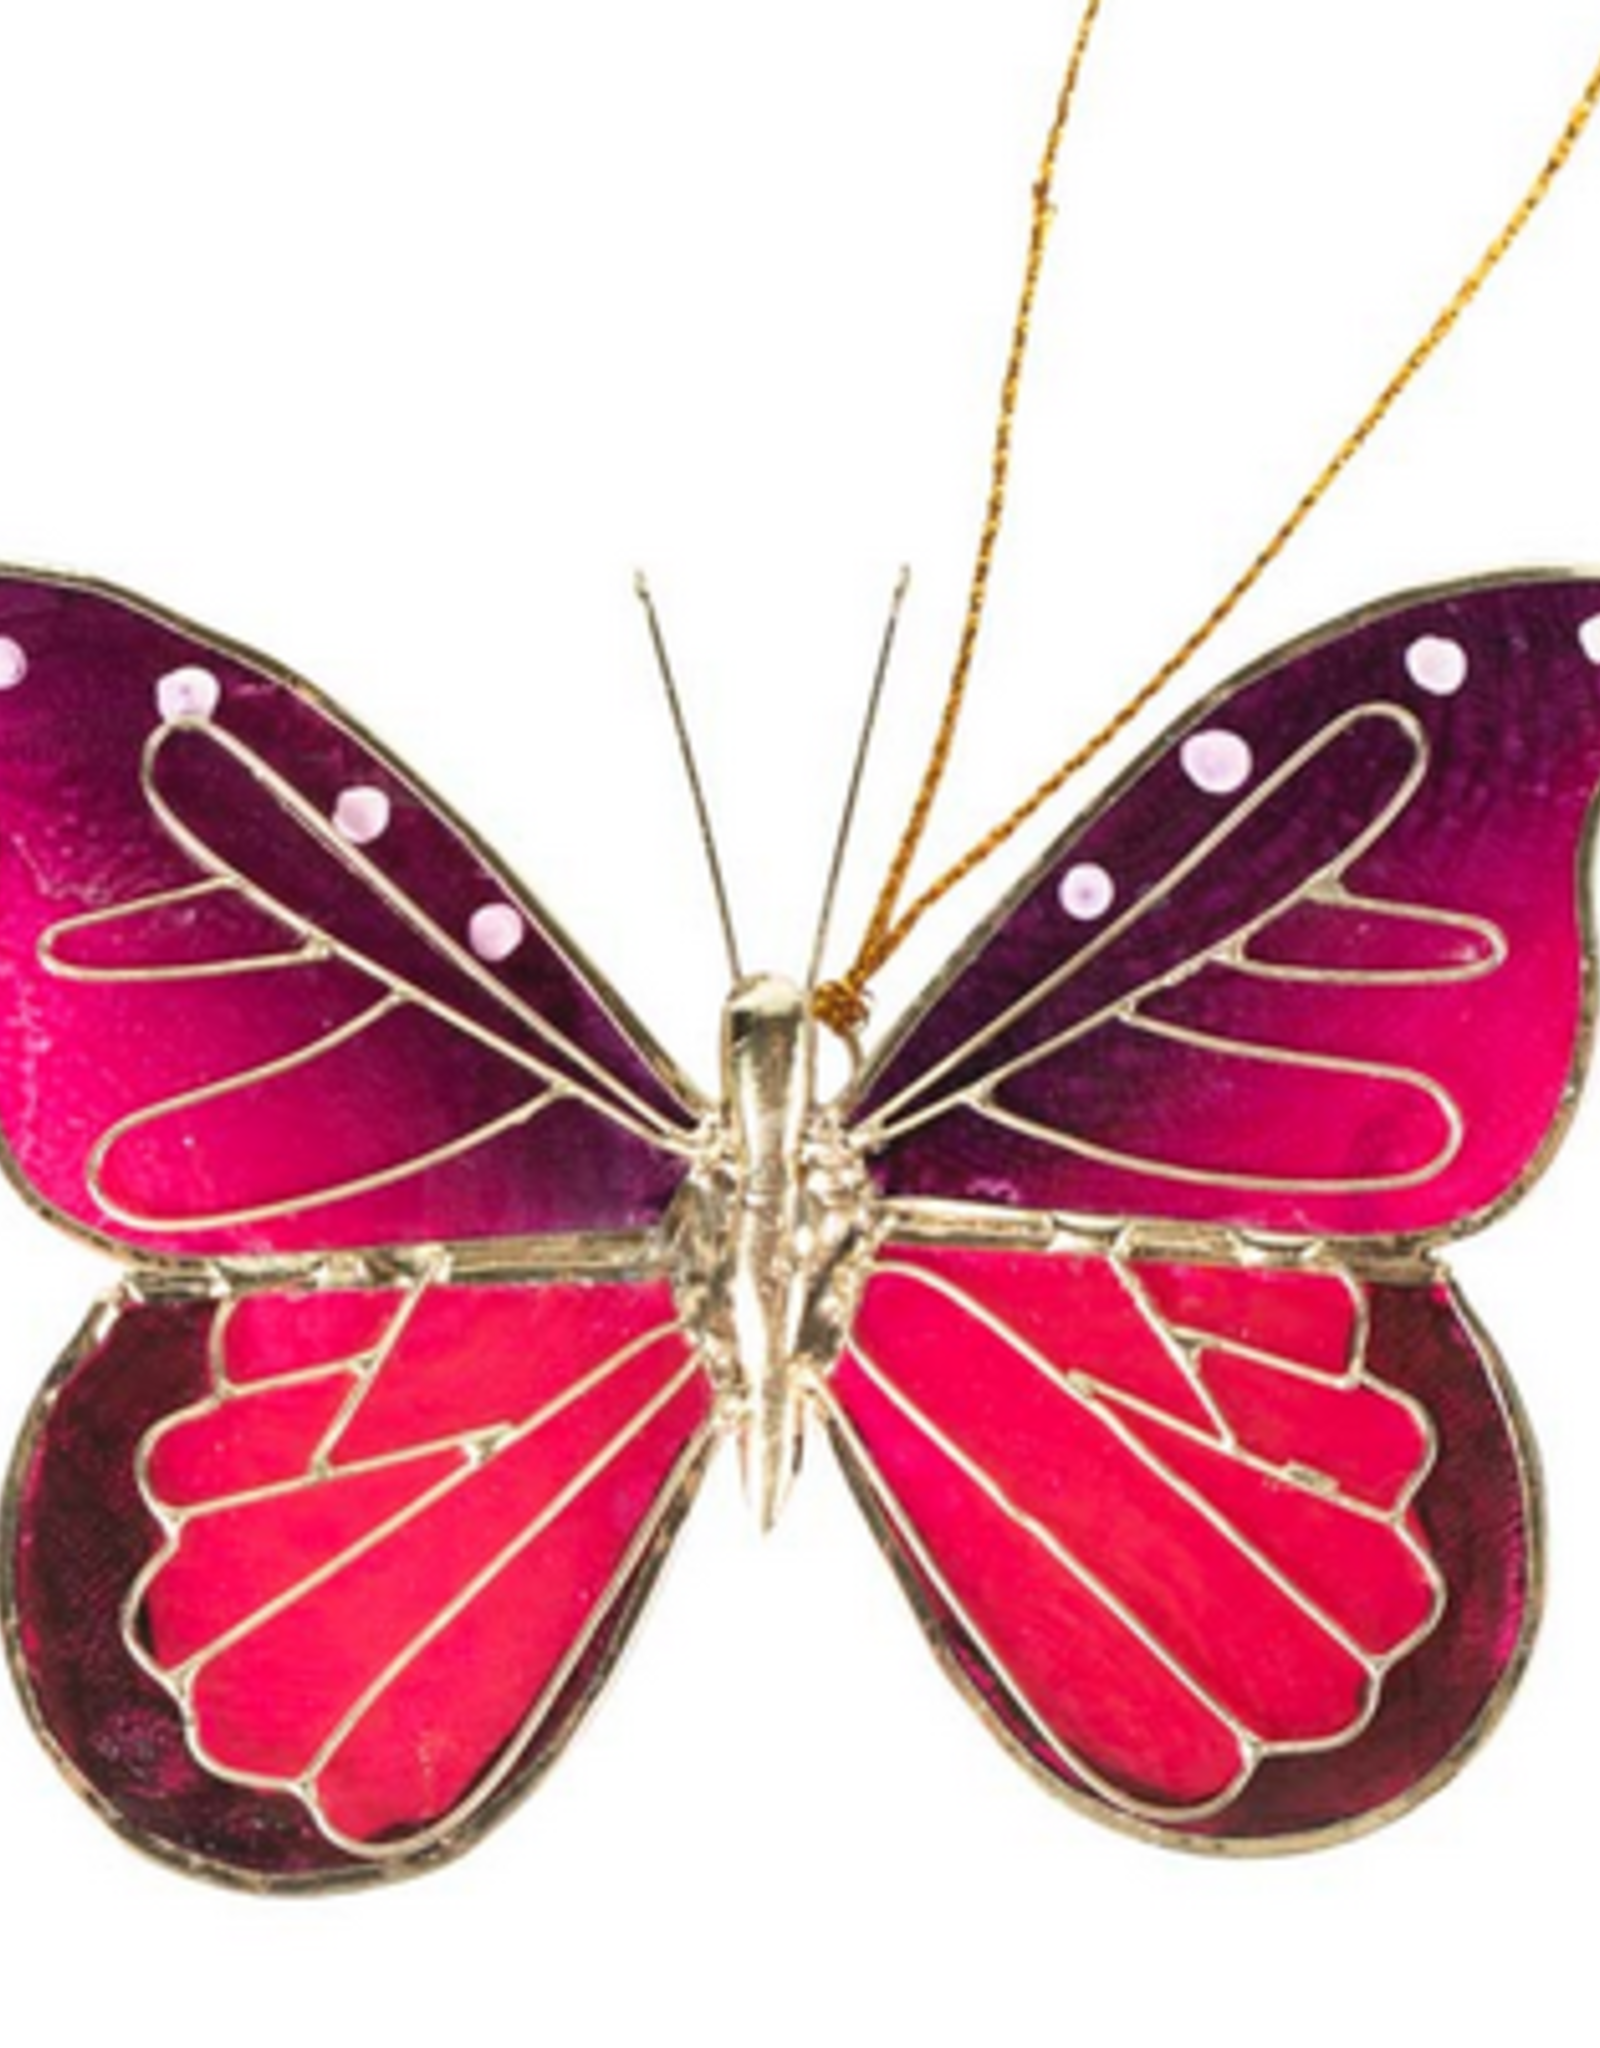 Ten Thousand Villages USA Ornament, Pink Capiz Butterfly - Philippines